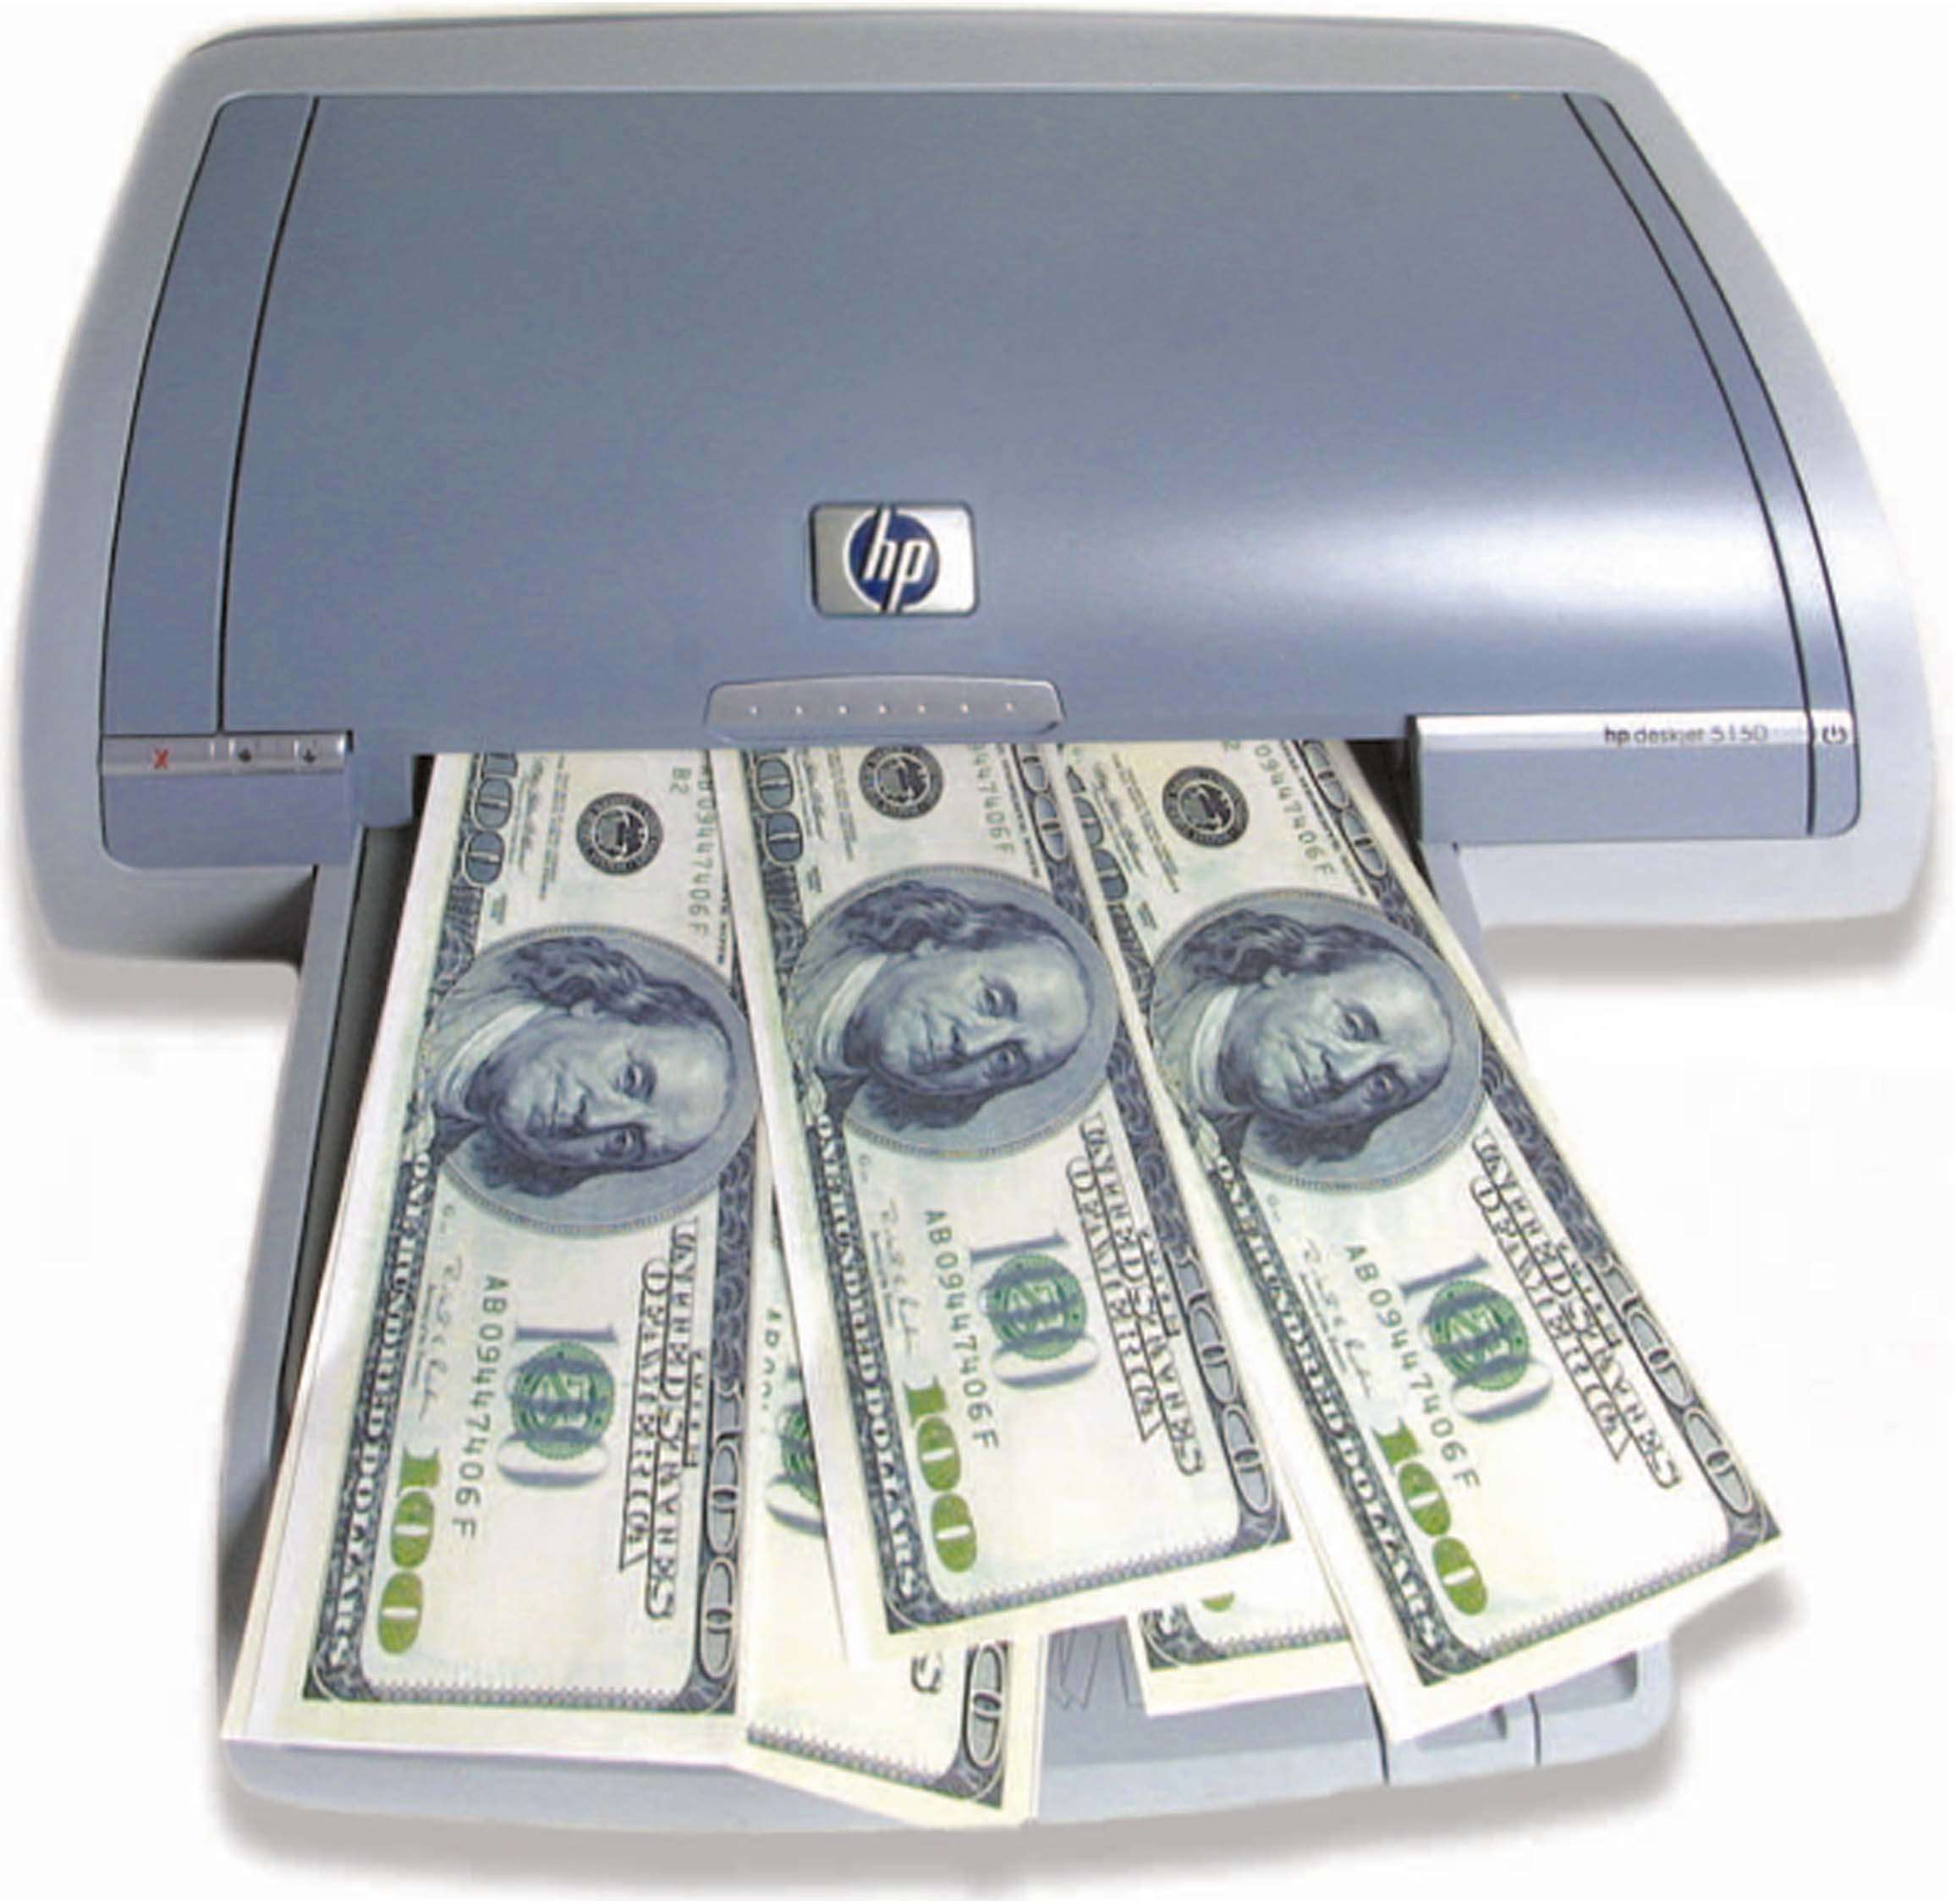 The Military Thinks Printers Value Over $1 Million Every